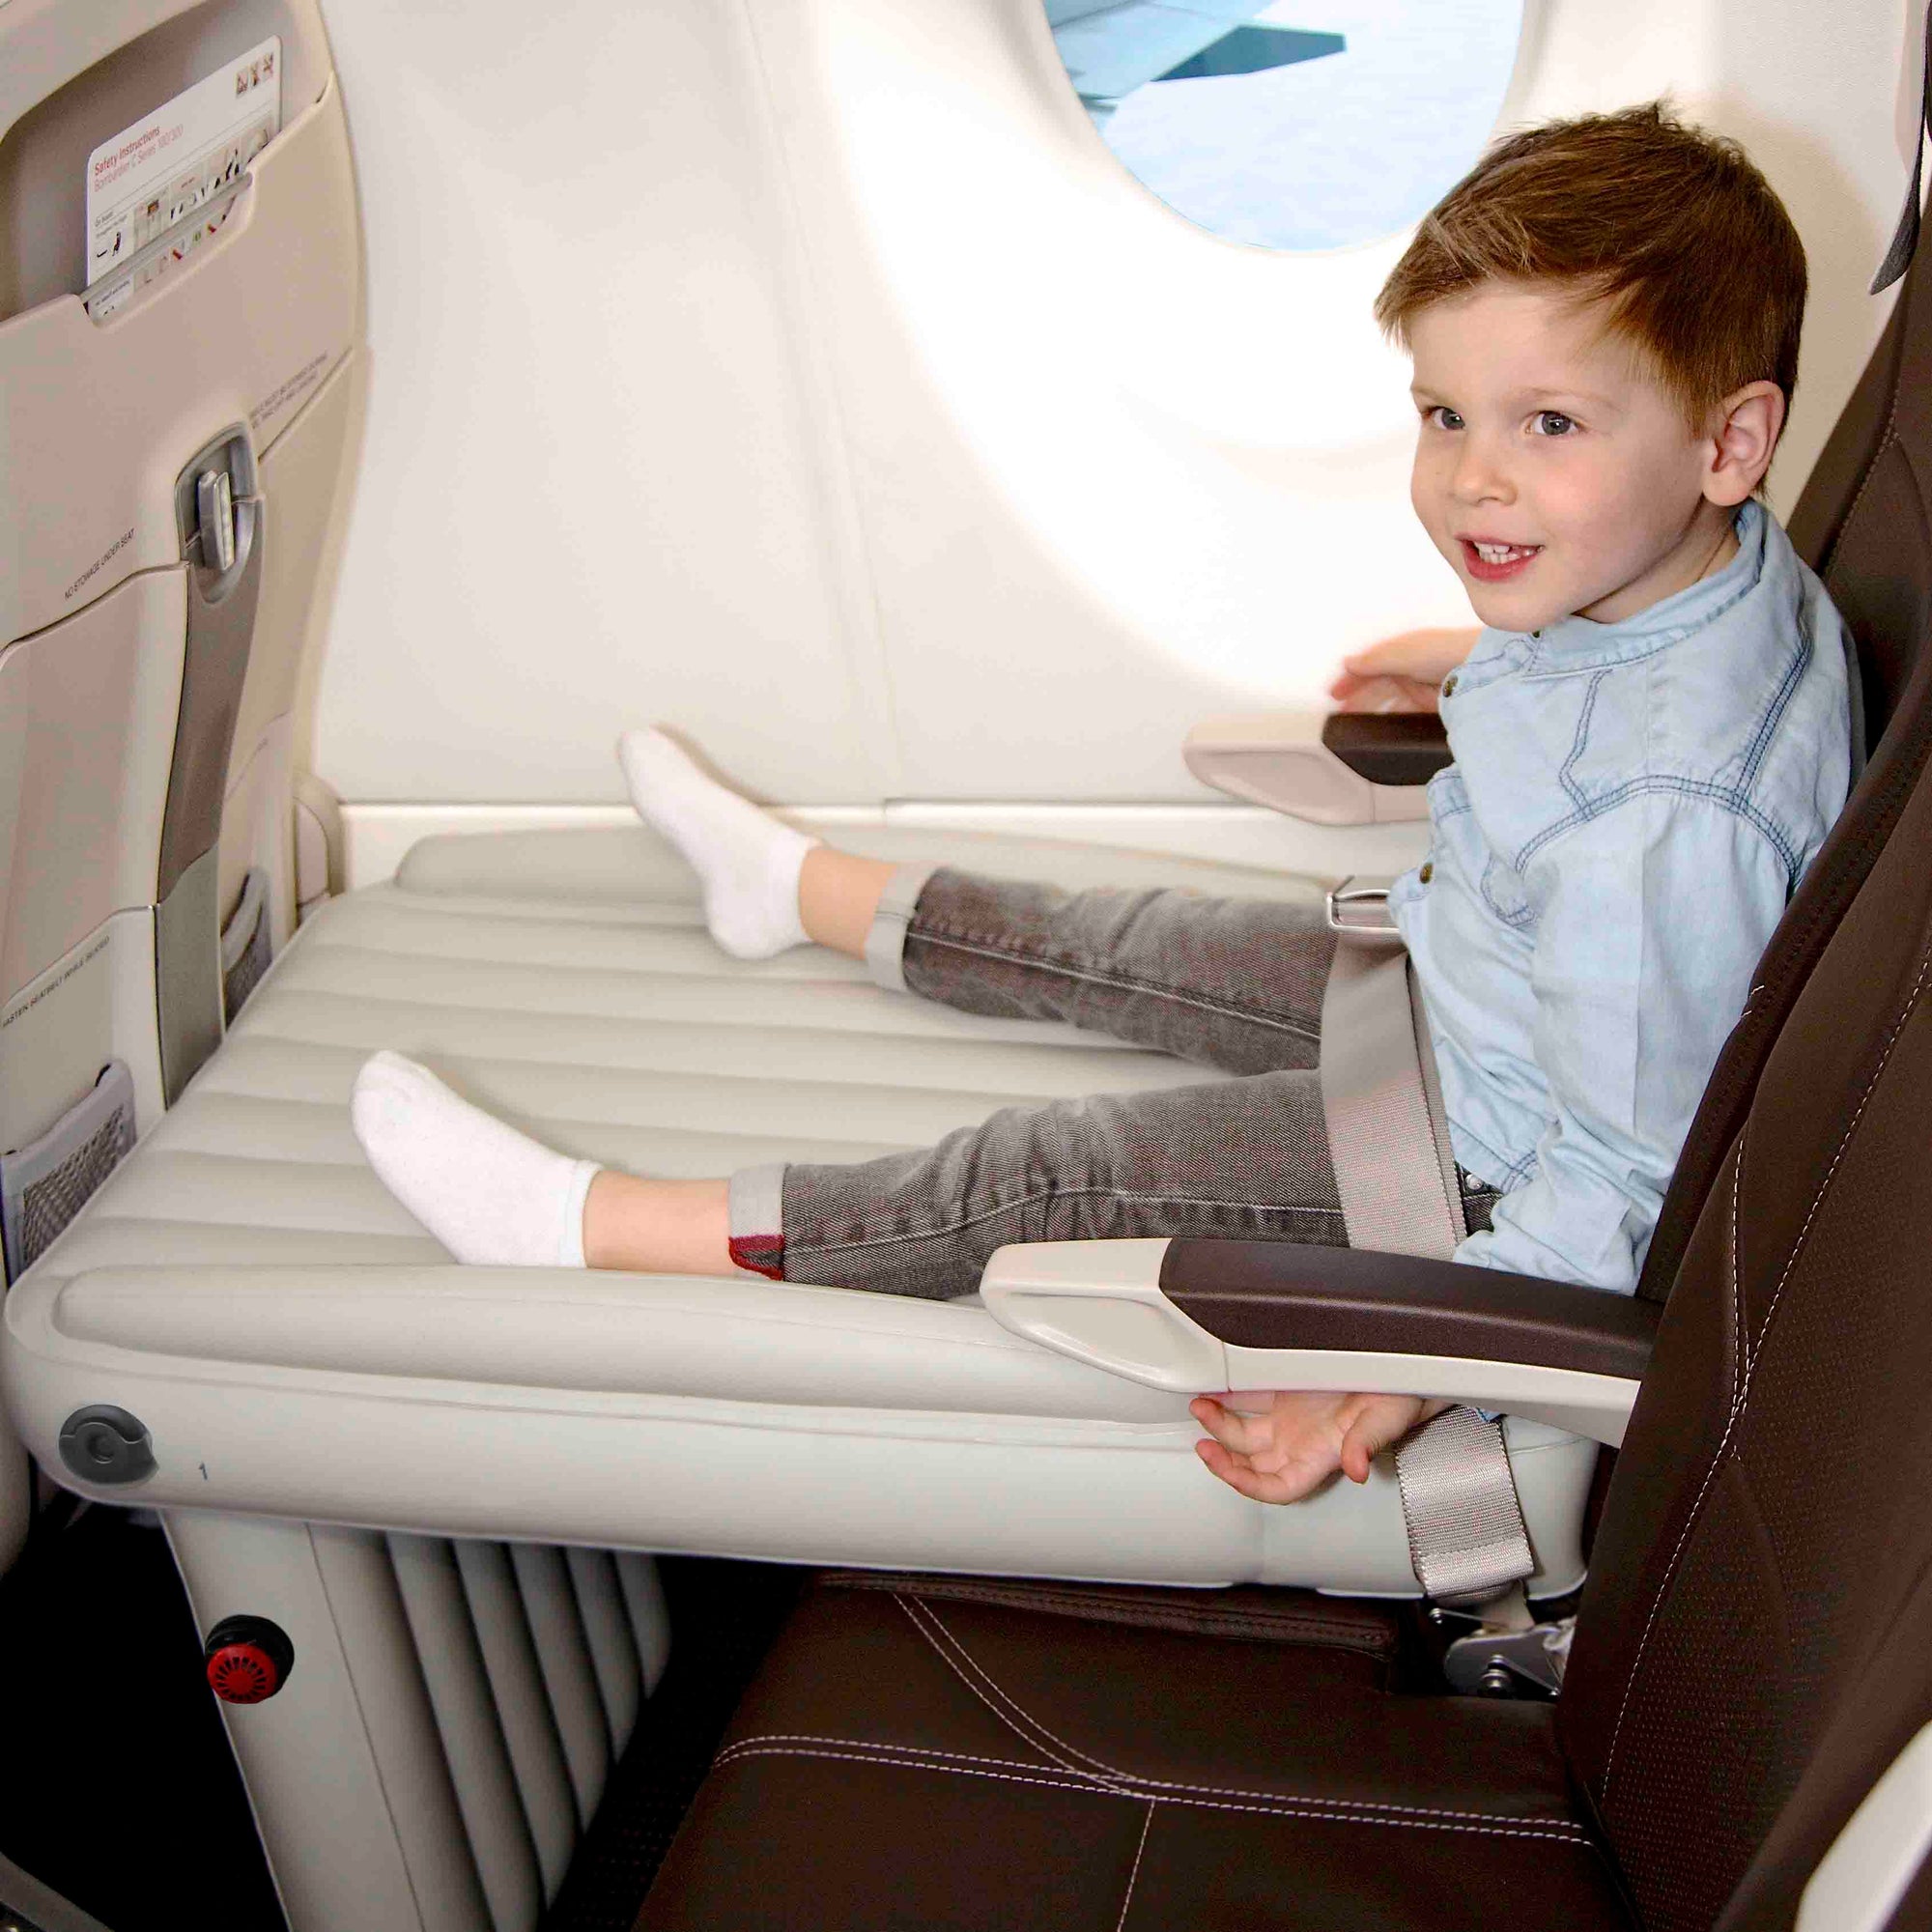 15 Best Travel Toys for Toddlers on Planes, According to Frequent Flyers